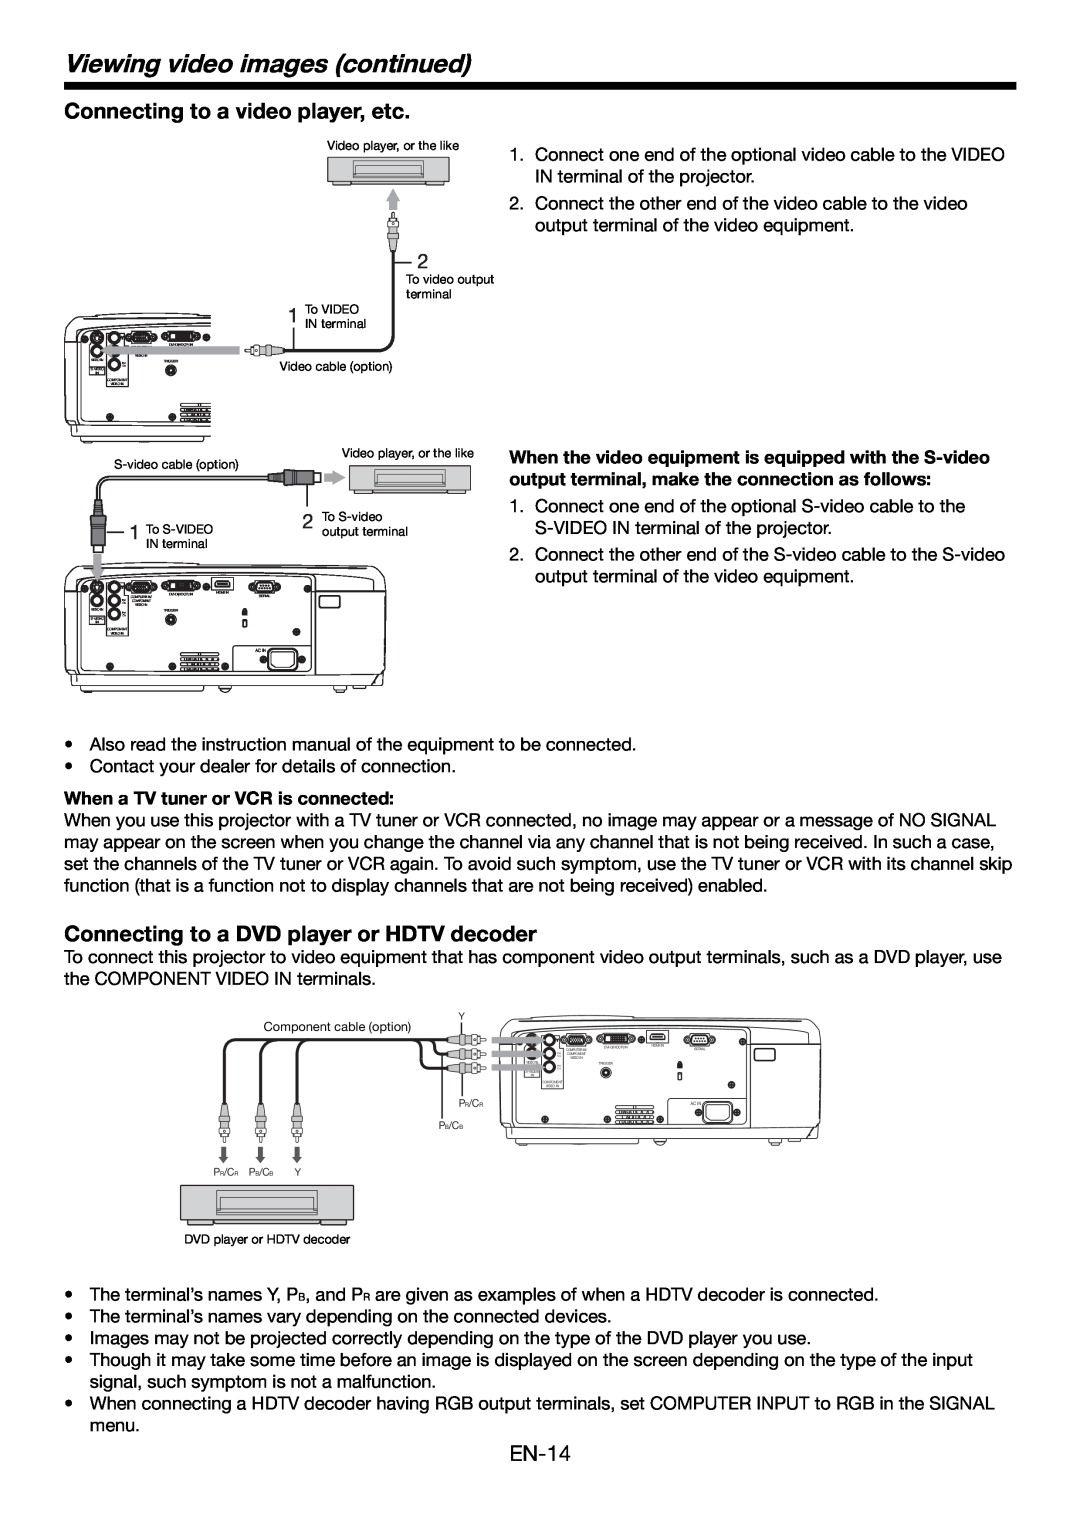 Mitsubishi Electronics HC4900 user manual Viewing video images continued, Connecting to a video player, etc 